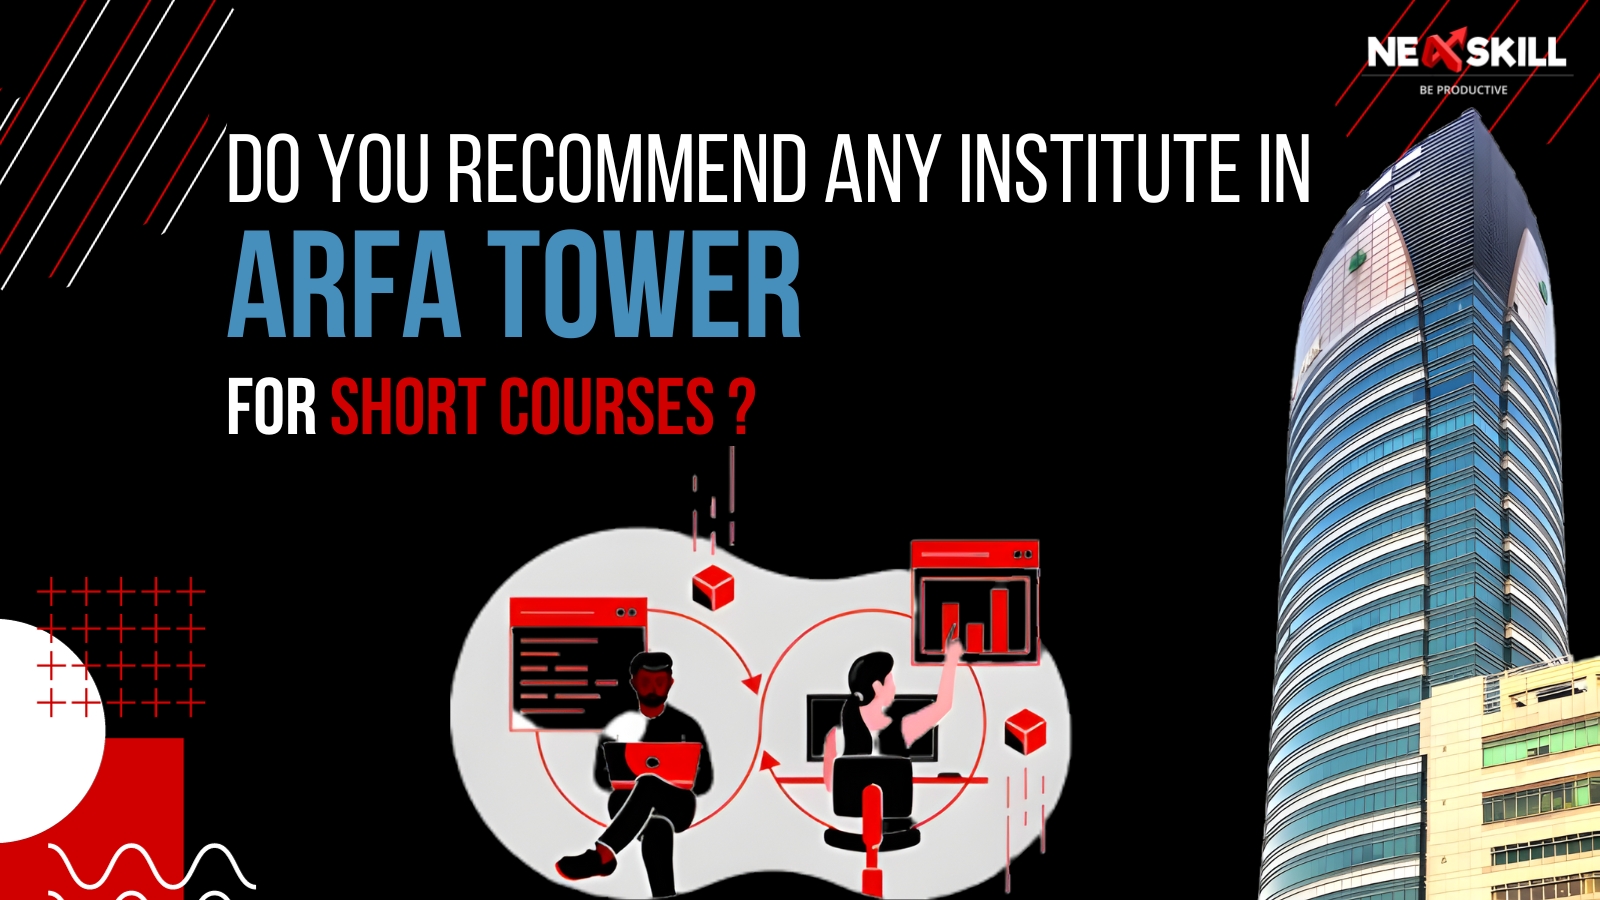 Do You Recommend any Institute in Arfa Tower for Short Courses?